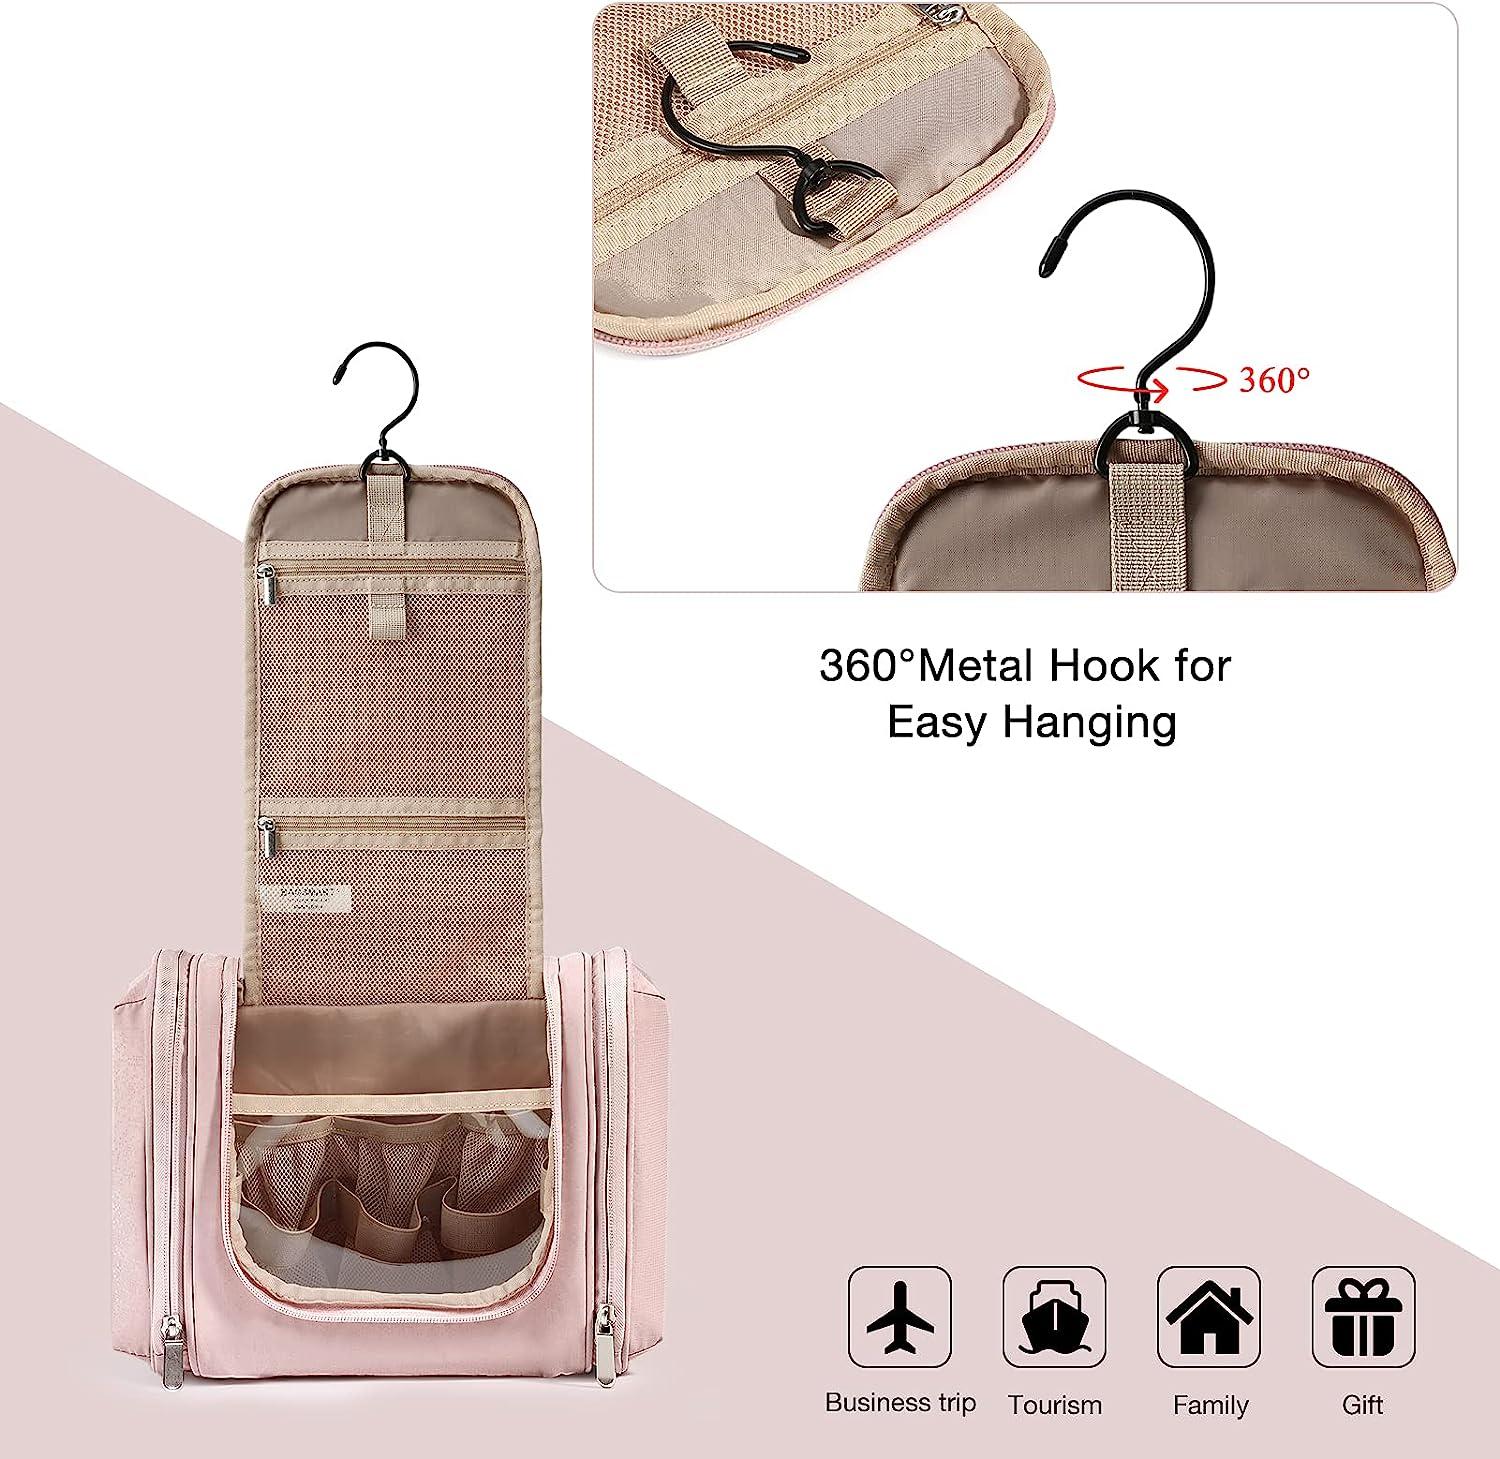 BAGSMART Extra Large Toiletry Bag Hanging Toiletry Bag for Travel,  Water-resistant Cosmetic Makeup Travel Bag, Large Capacity Travel Bag  Organizer for